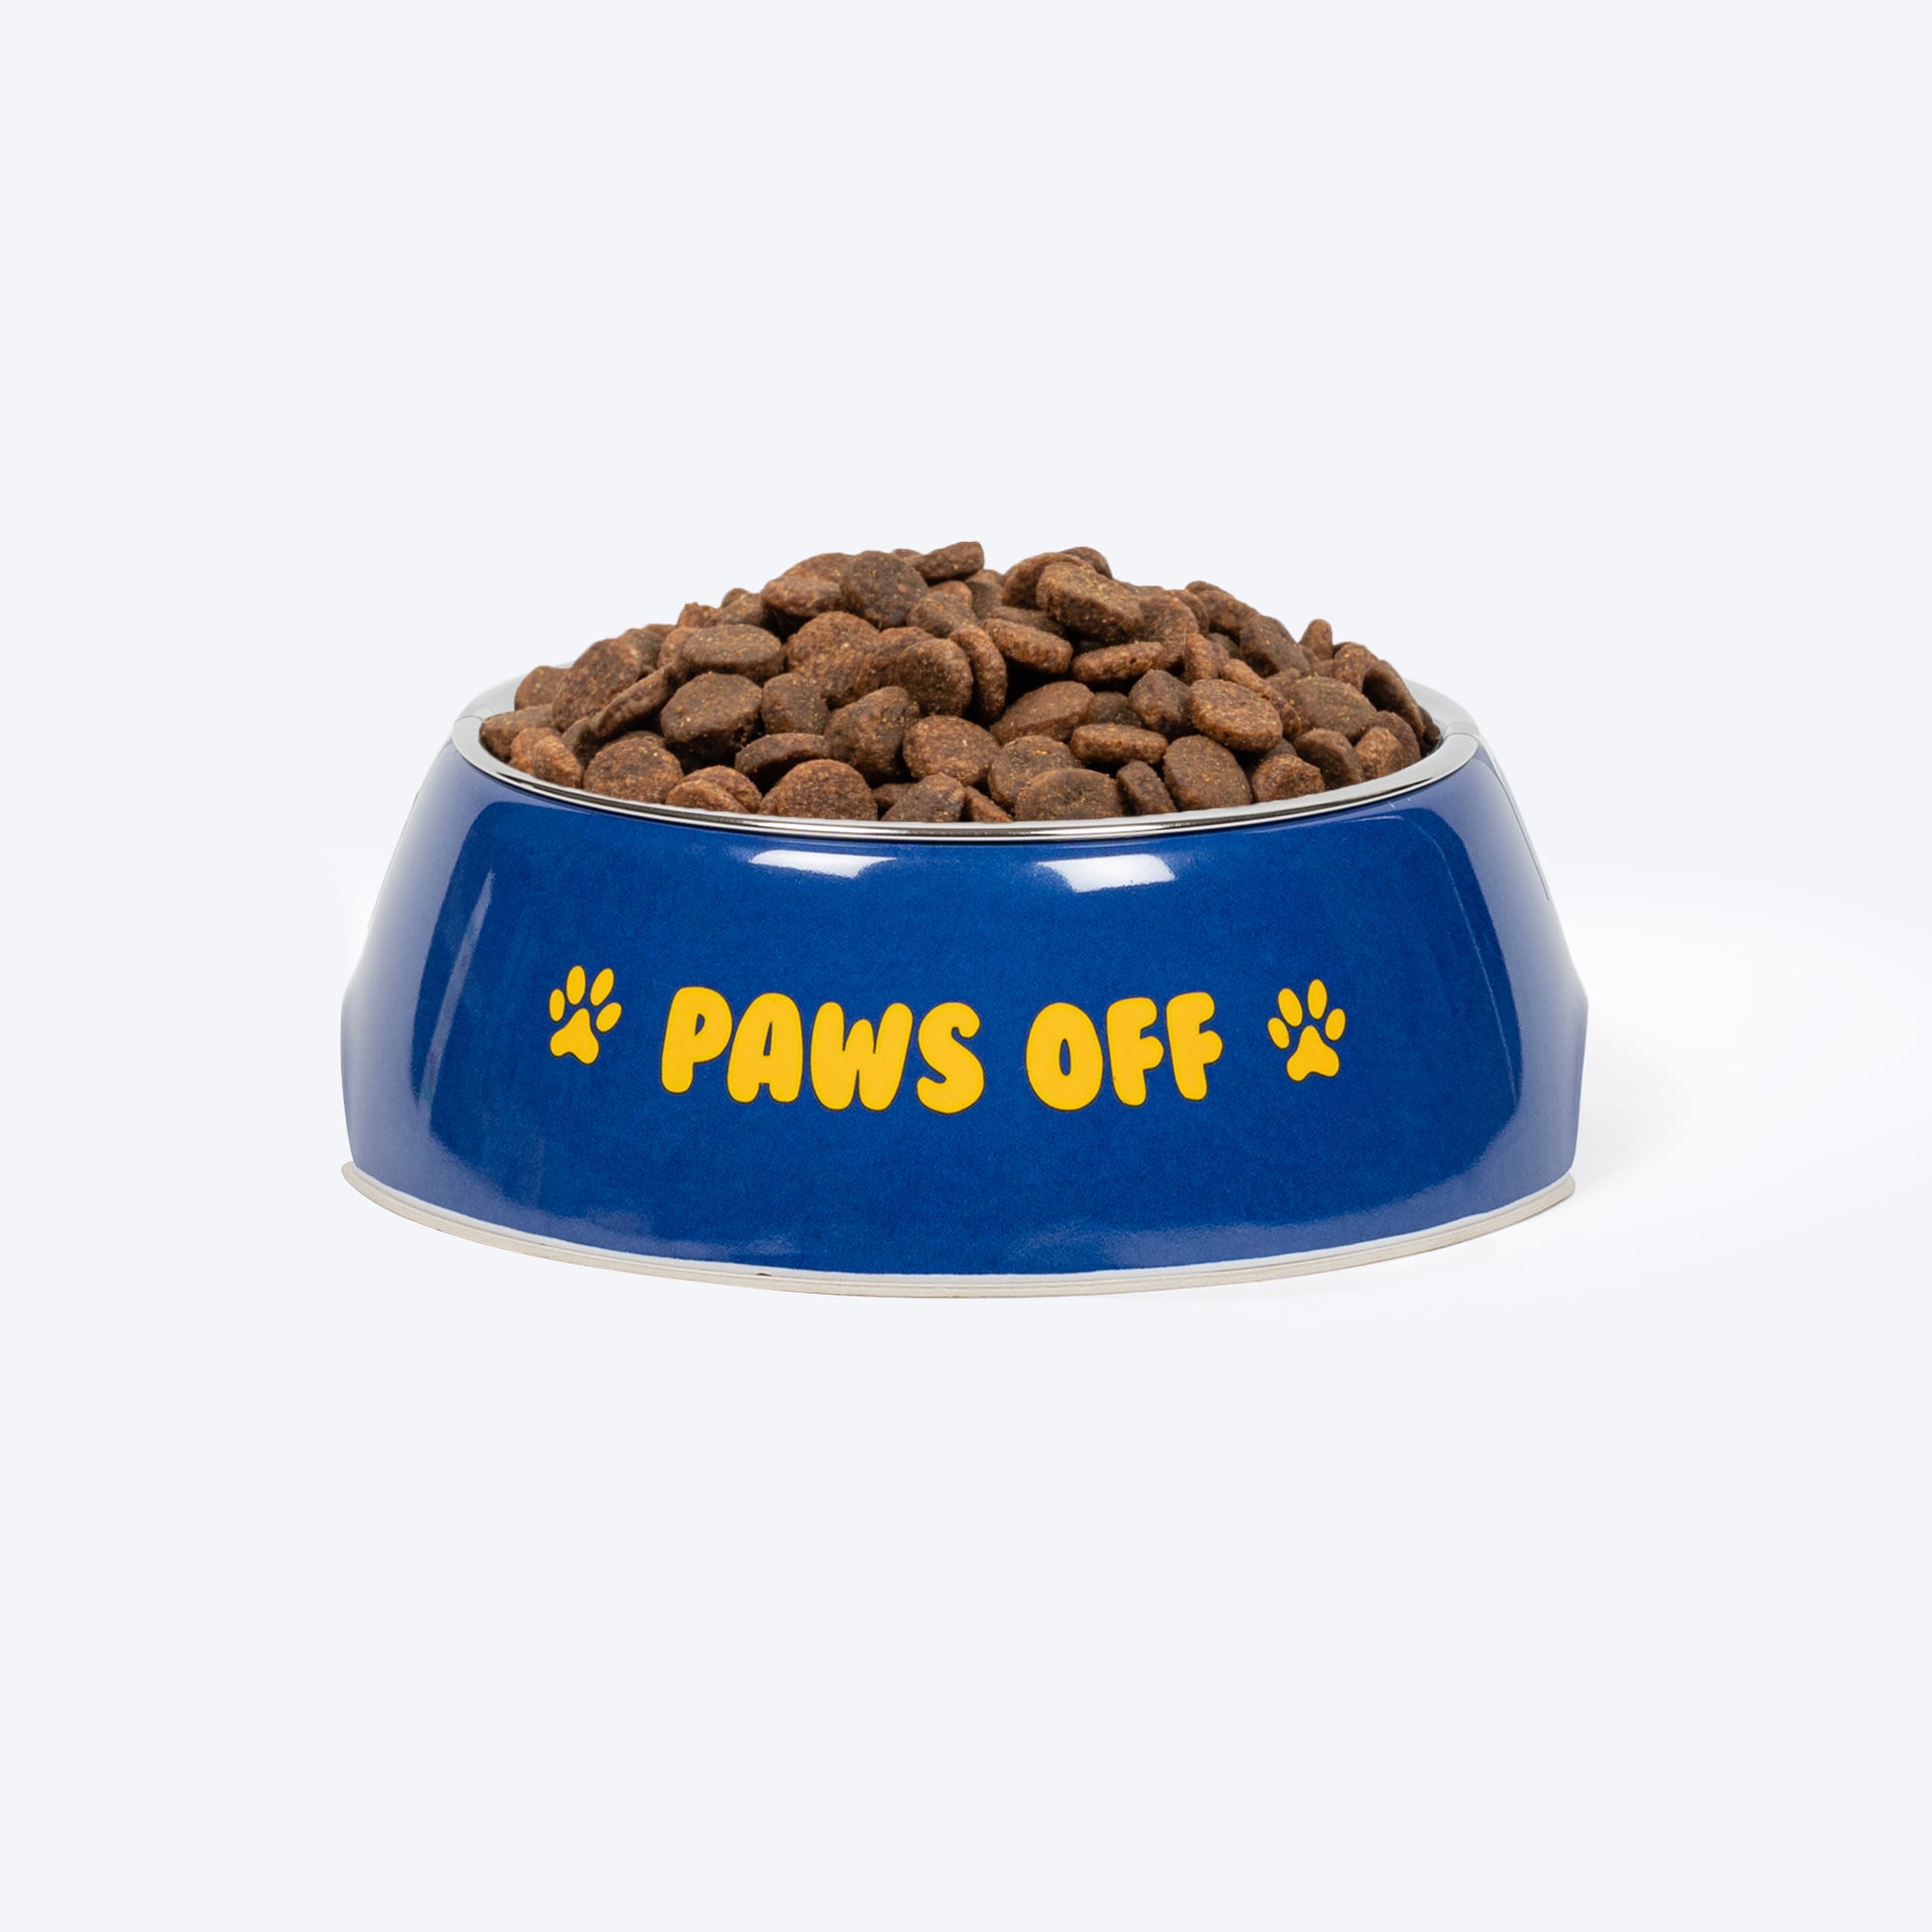 HUFT Paws Off Printed Melamine Bowl for Dogs - Blue - Heads Up For Tails